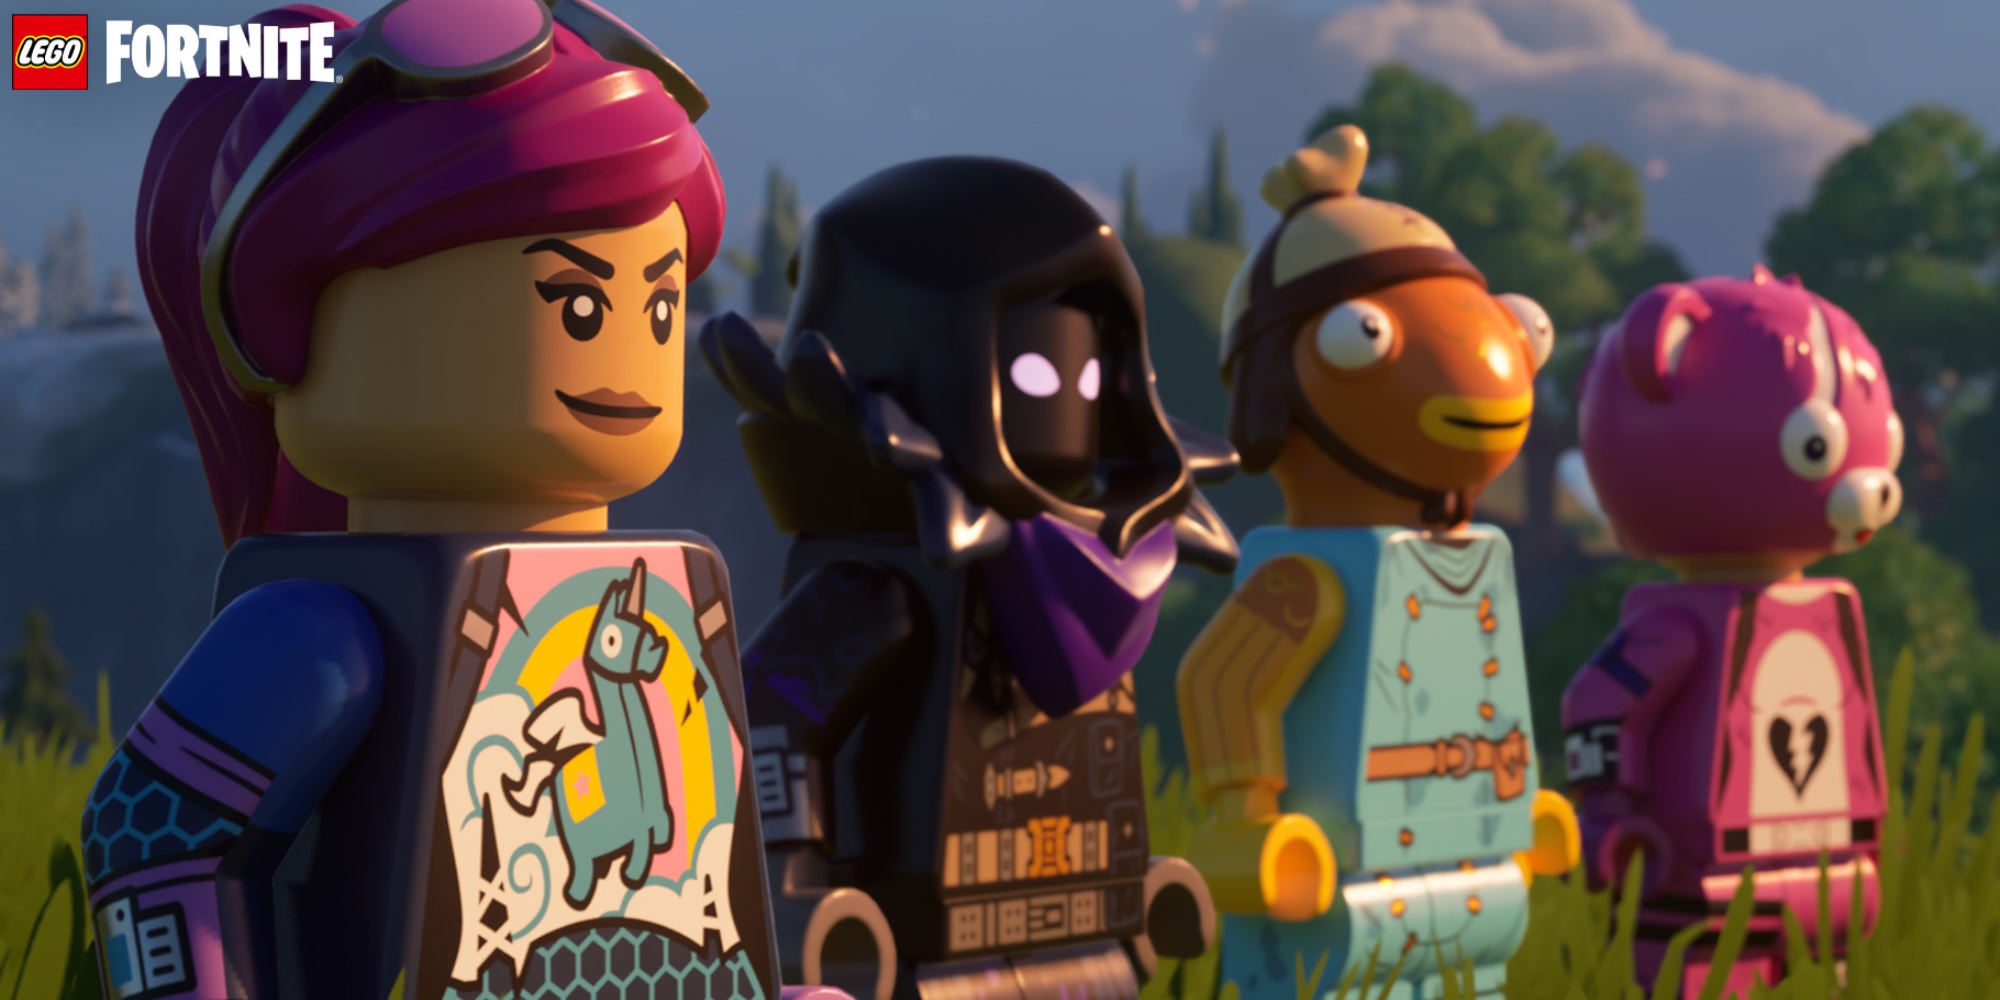 LEGO Fortnite Will Launch On Epic Games Store Next Week